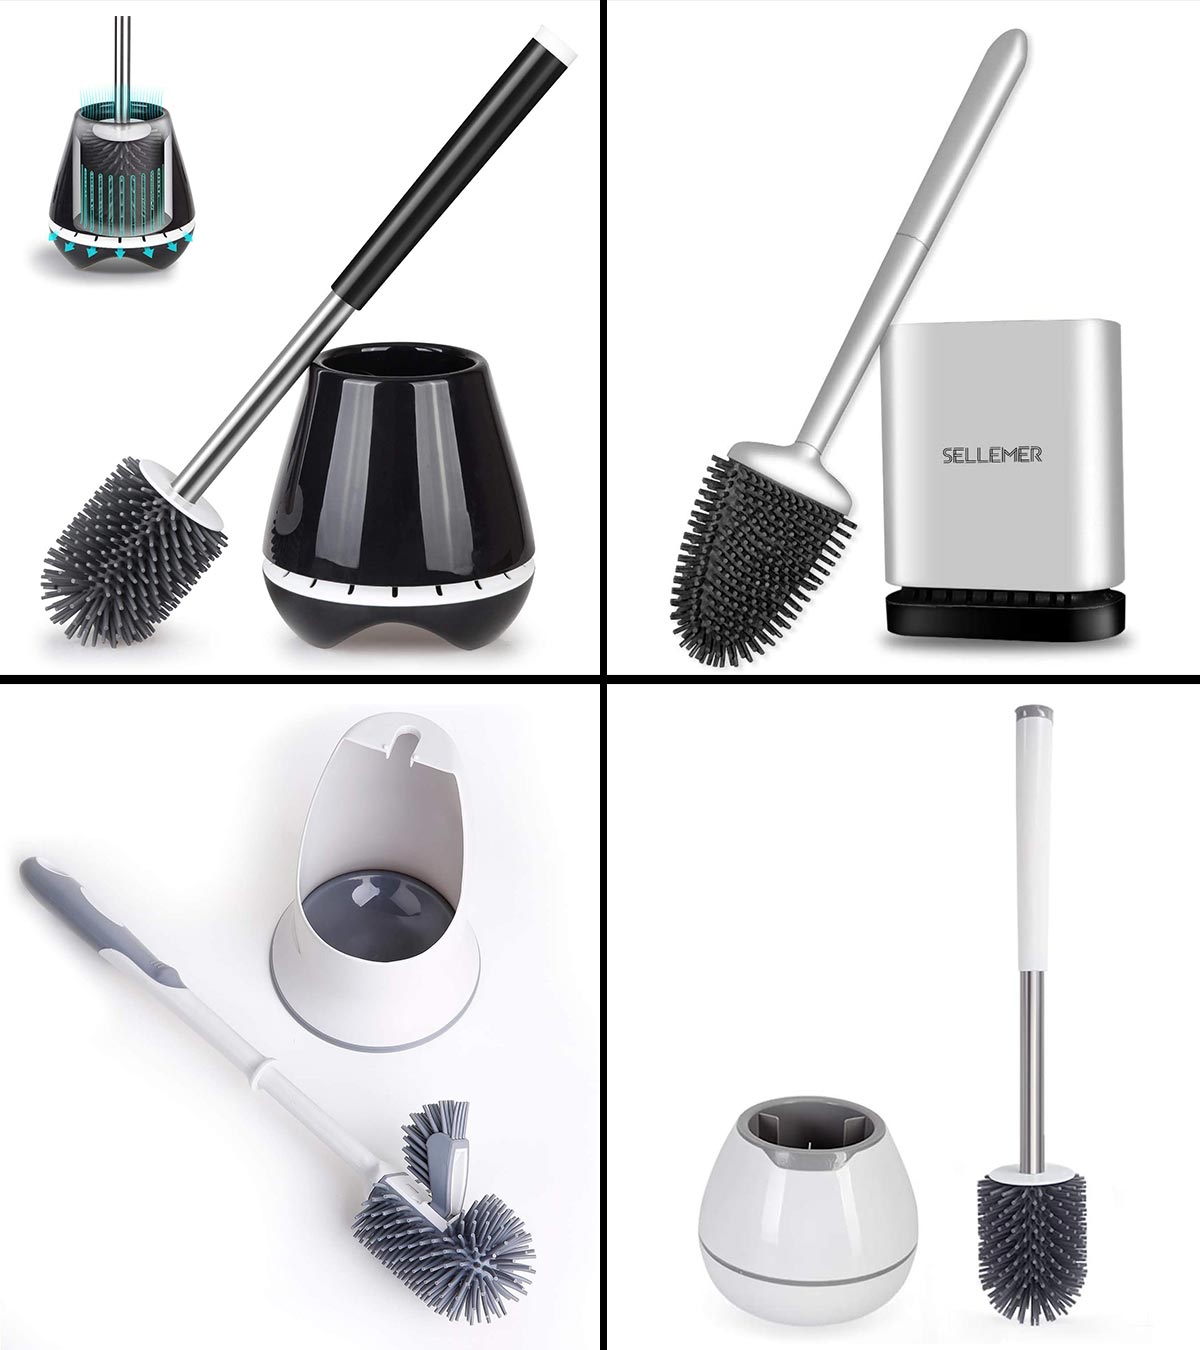 14 Different Types of Toilet Brushes (Buying Guide)